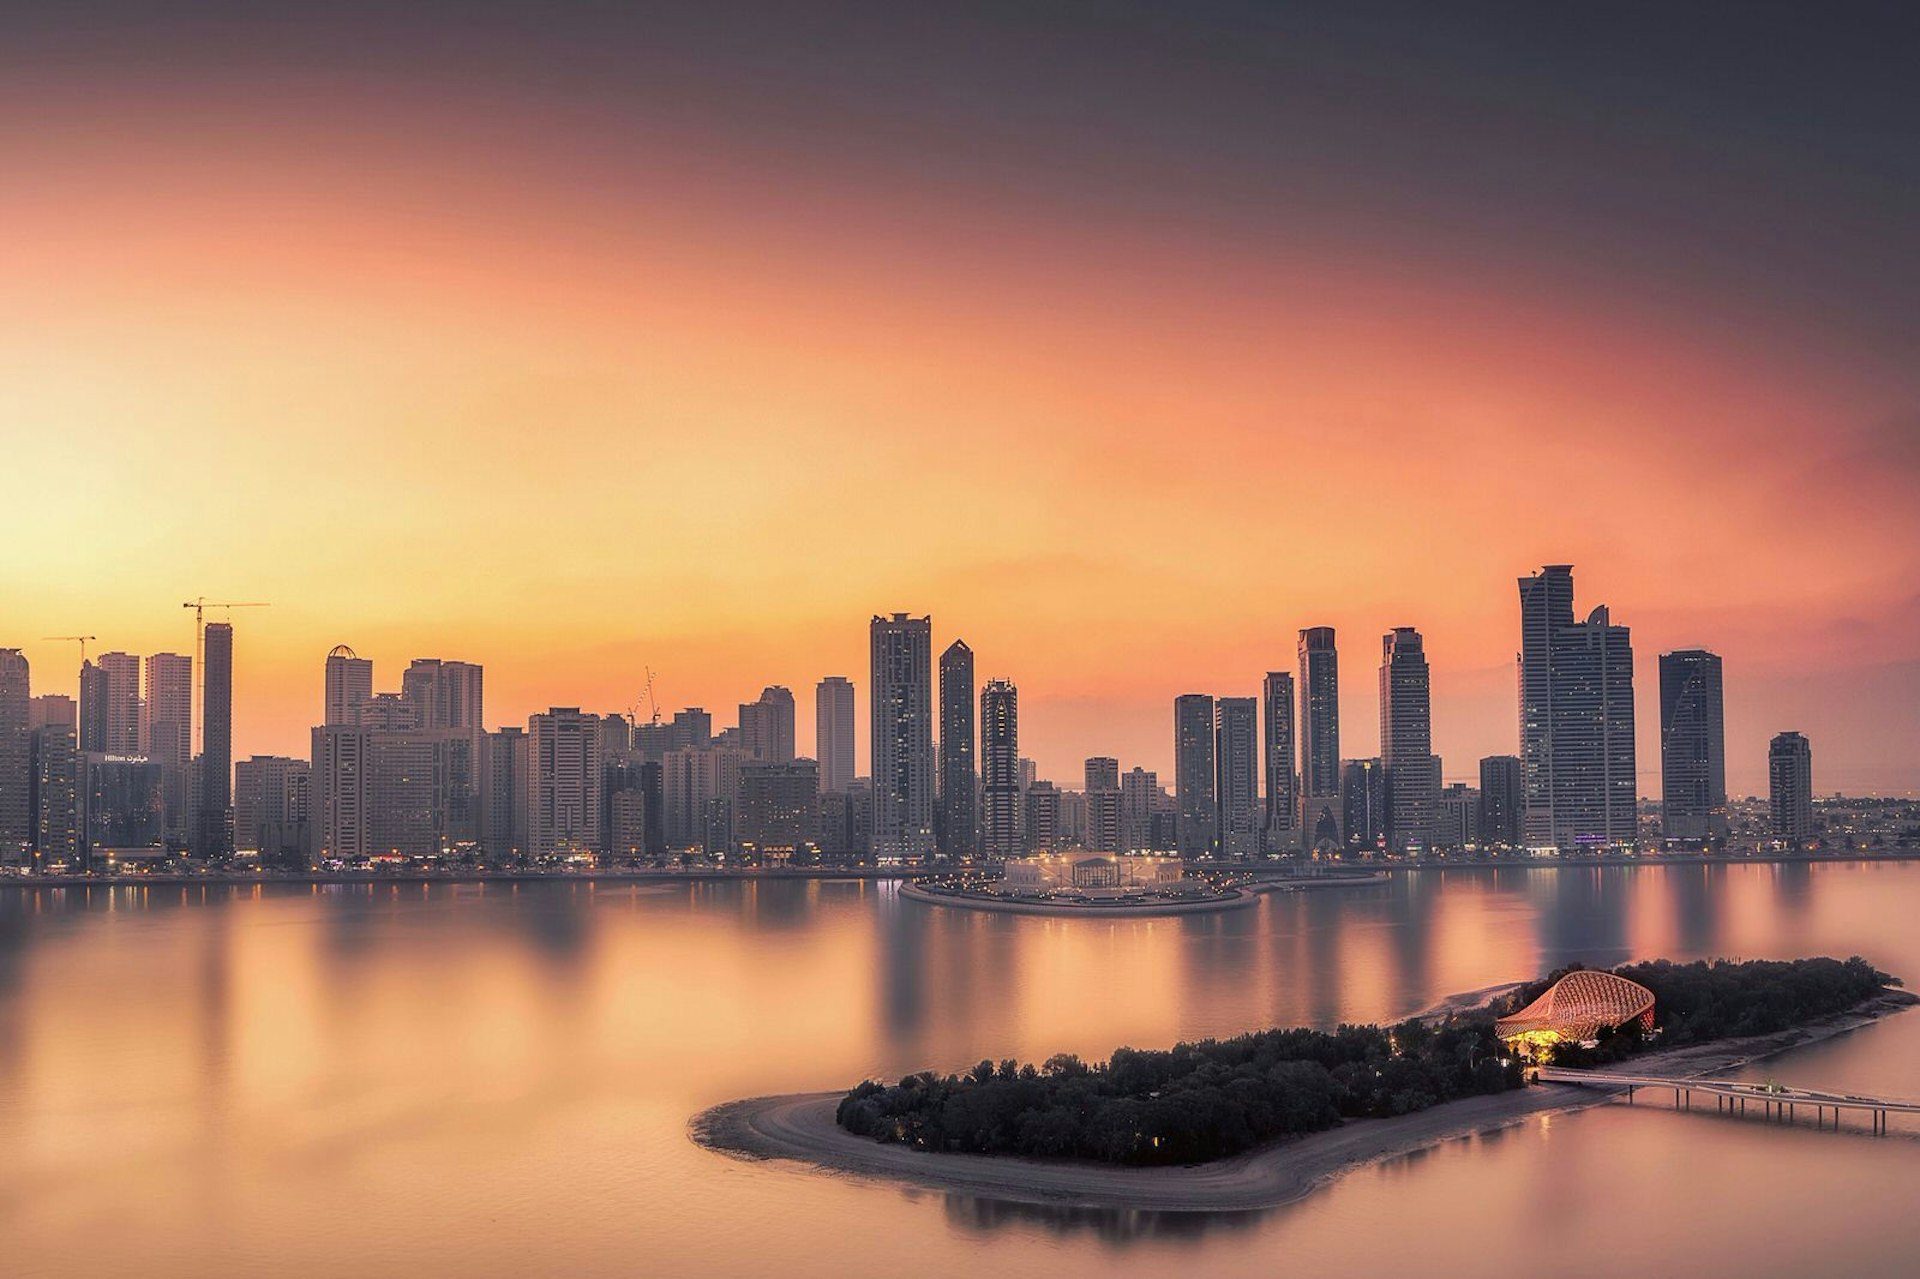 The Sharjah city skyline at sunset with Al Noor Island in the foreground, United Arab Emirates